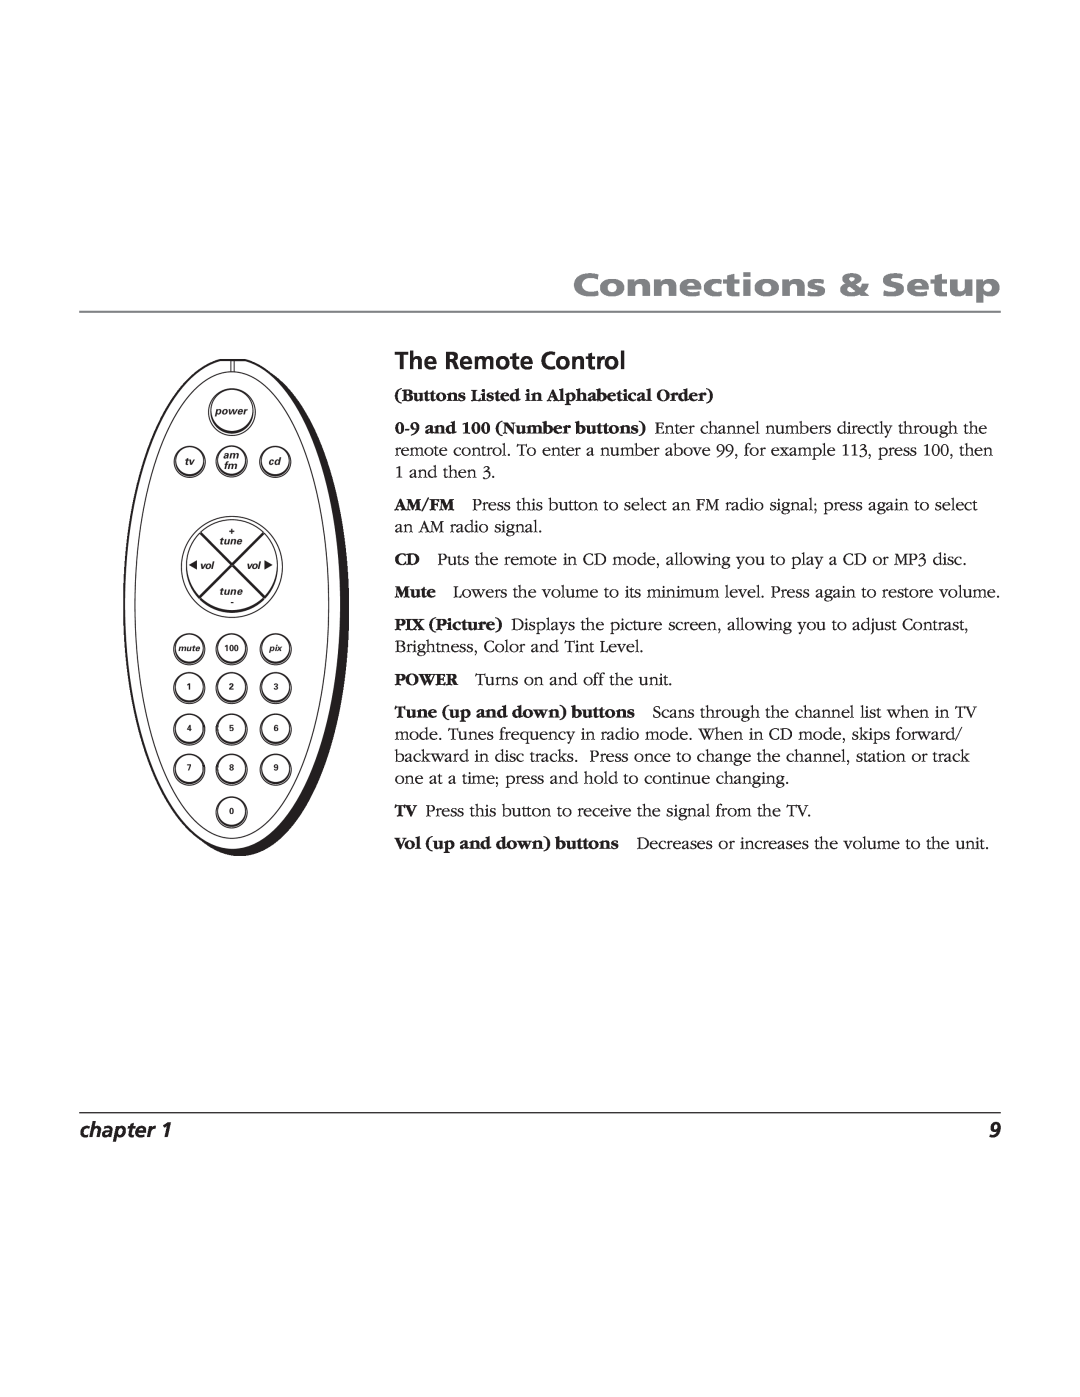 RCA BLC524 user manual The Remote Control, Connections & Setup, chapter 